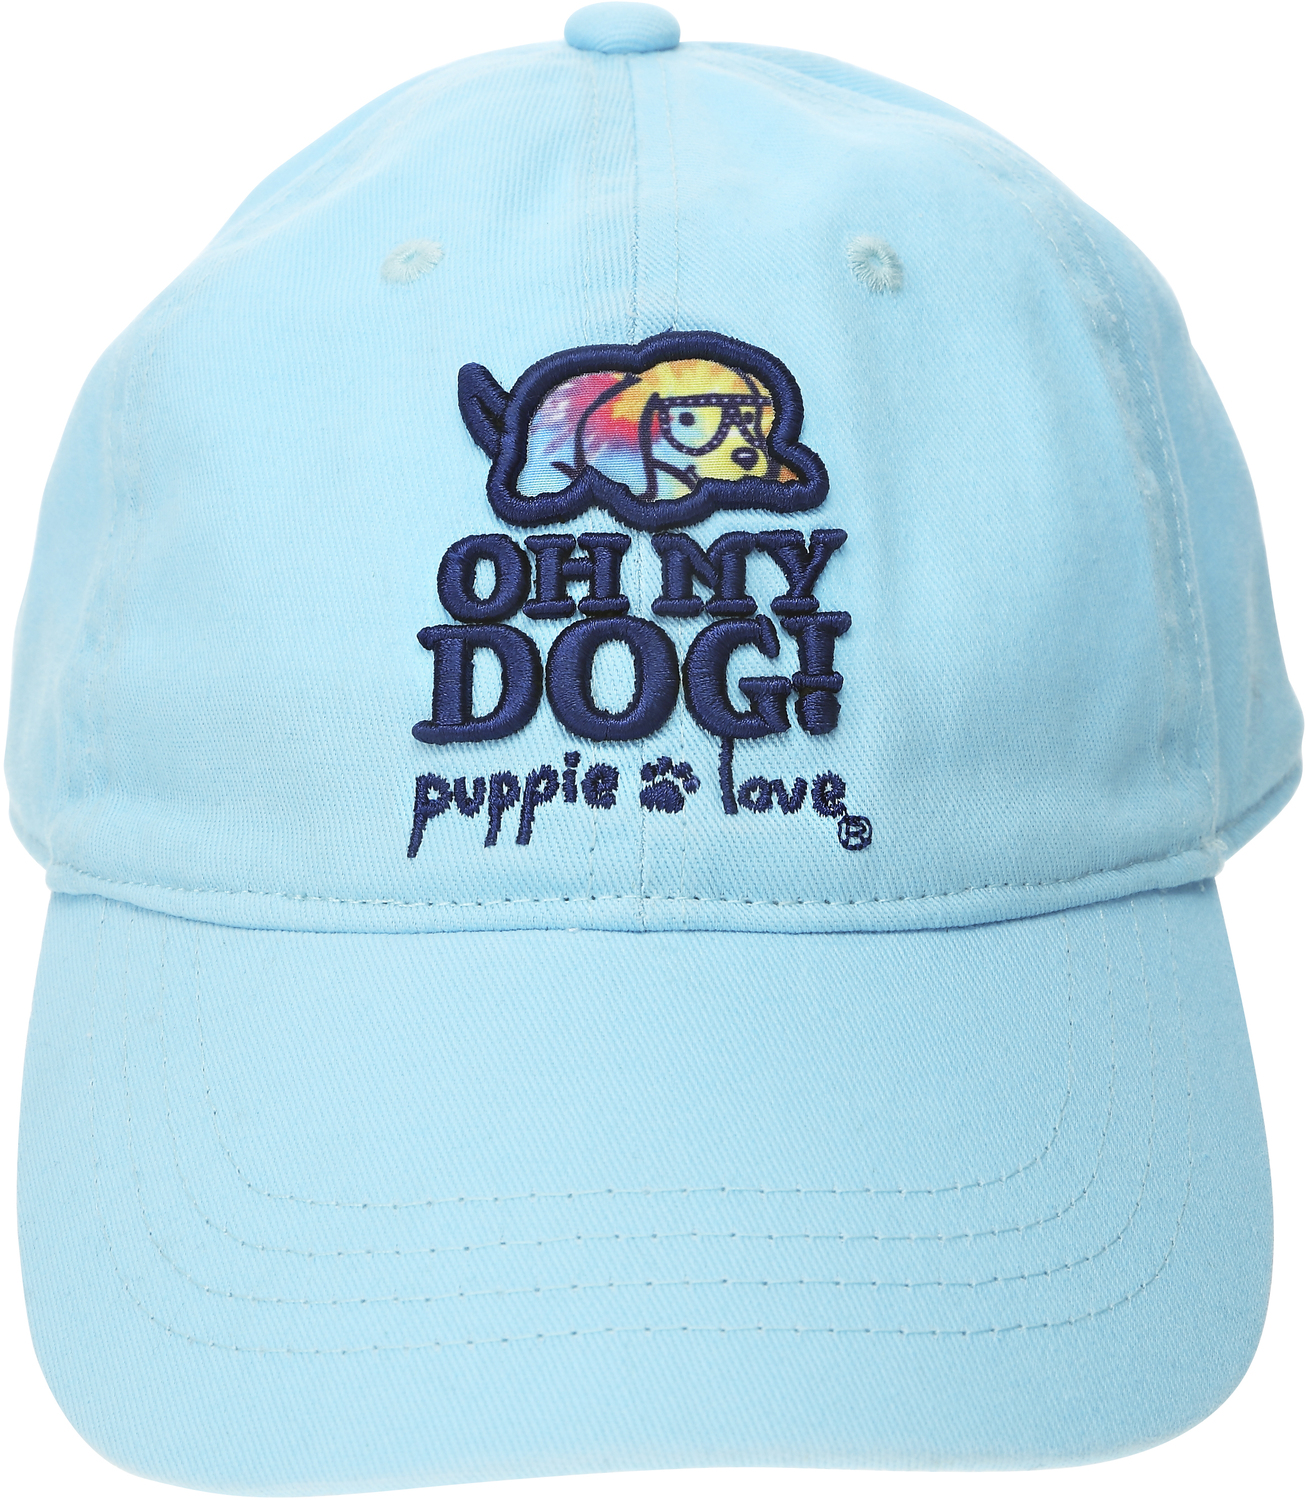 Oh My Dog! by Puppie Love - Oh My Dog! - Light Blue Adjustable Hat